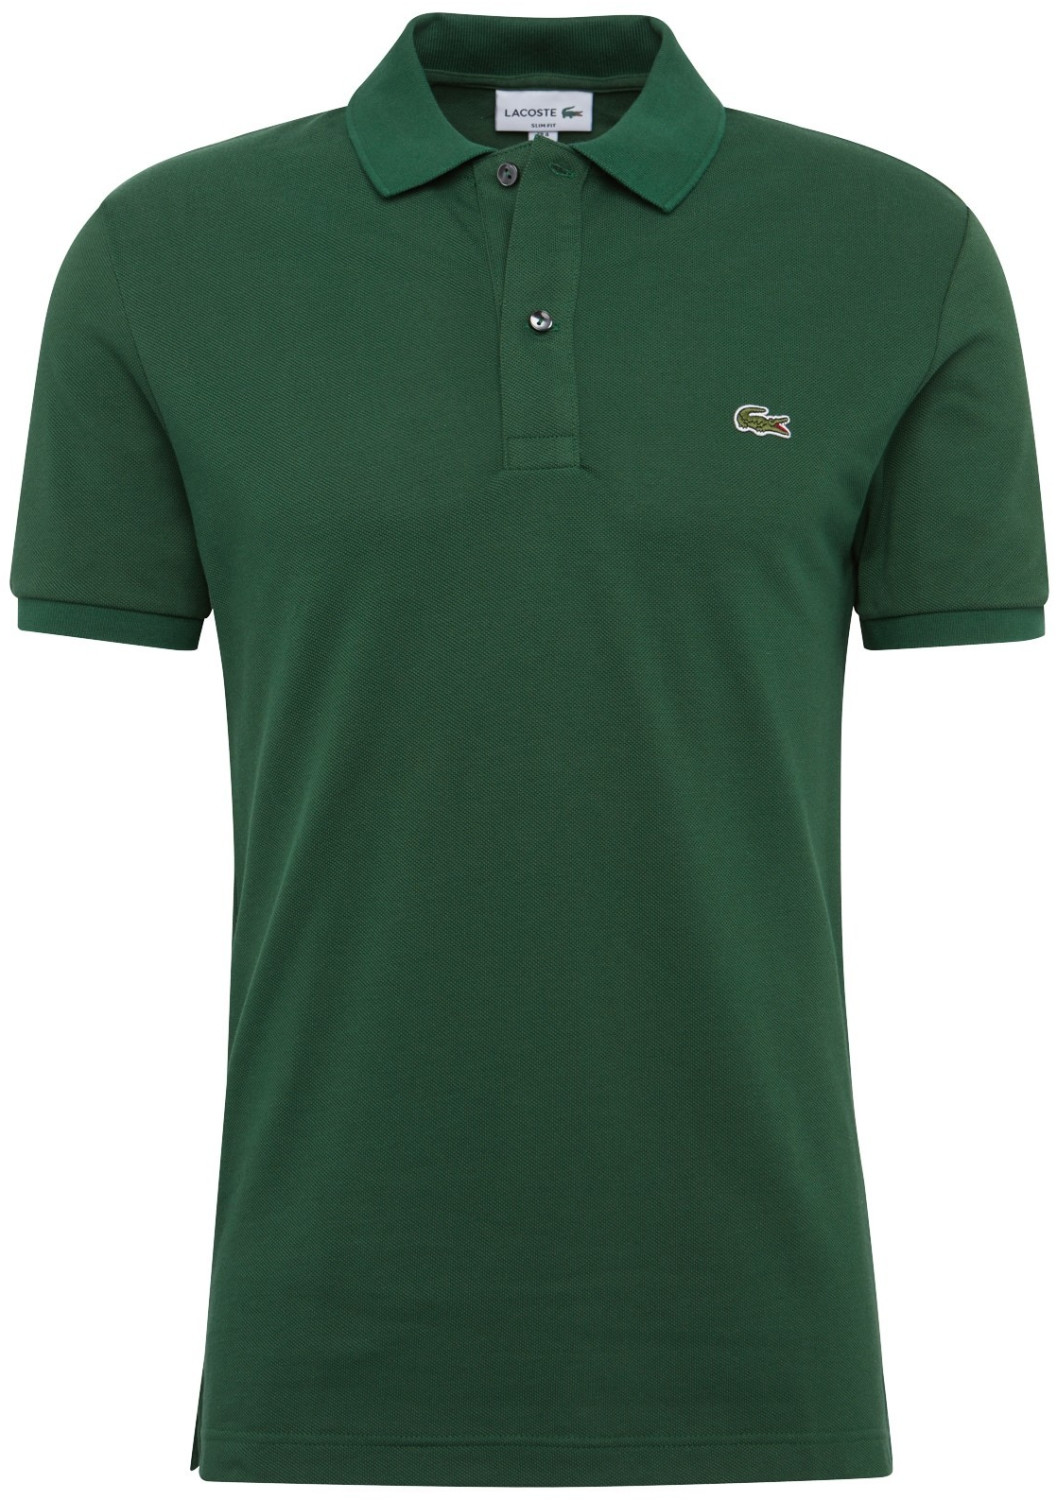 Buy Lacoste Slim Fit Polo Shirt (PH4012) green 132 from £59.99 (Today ...